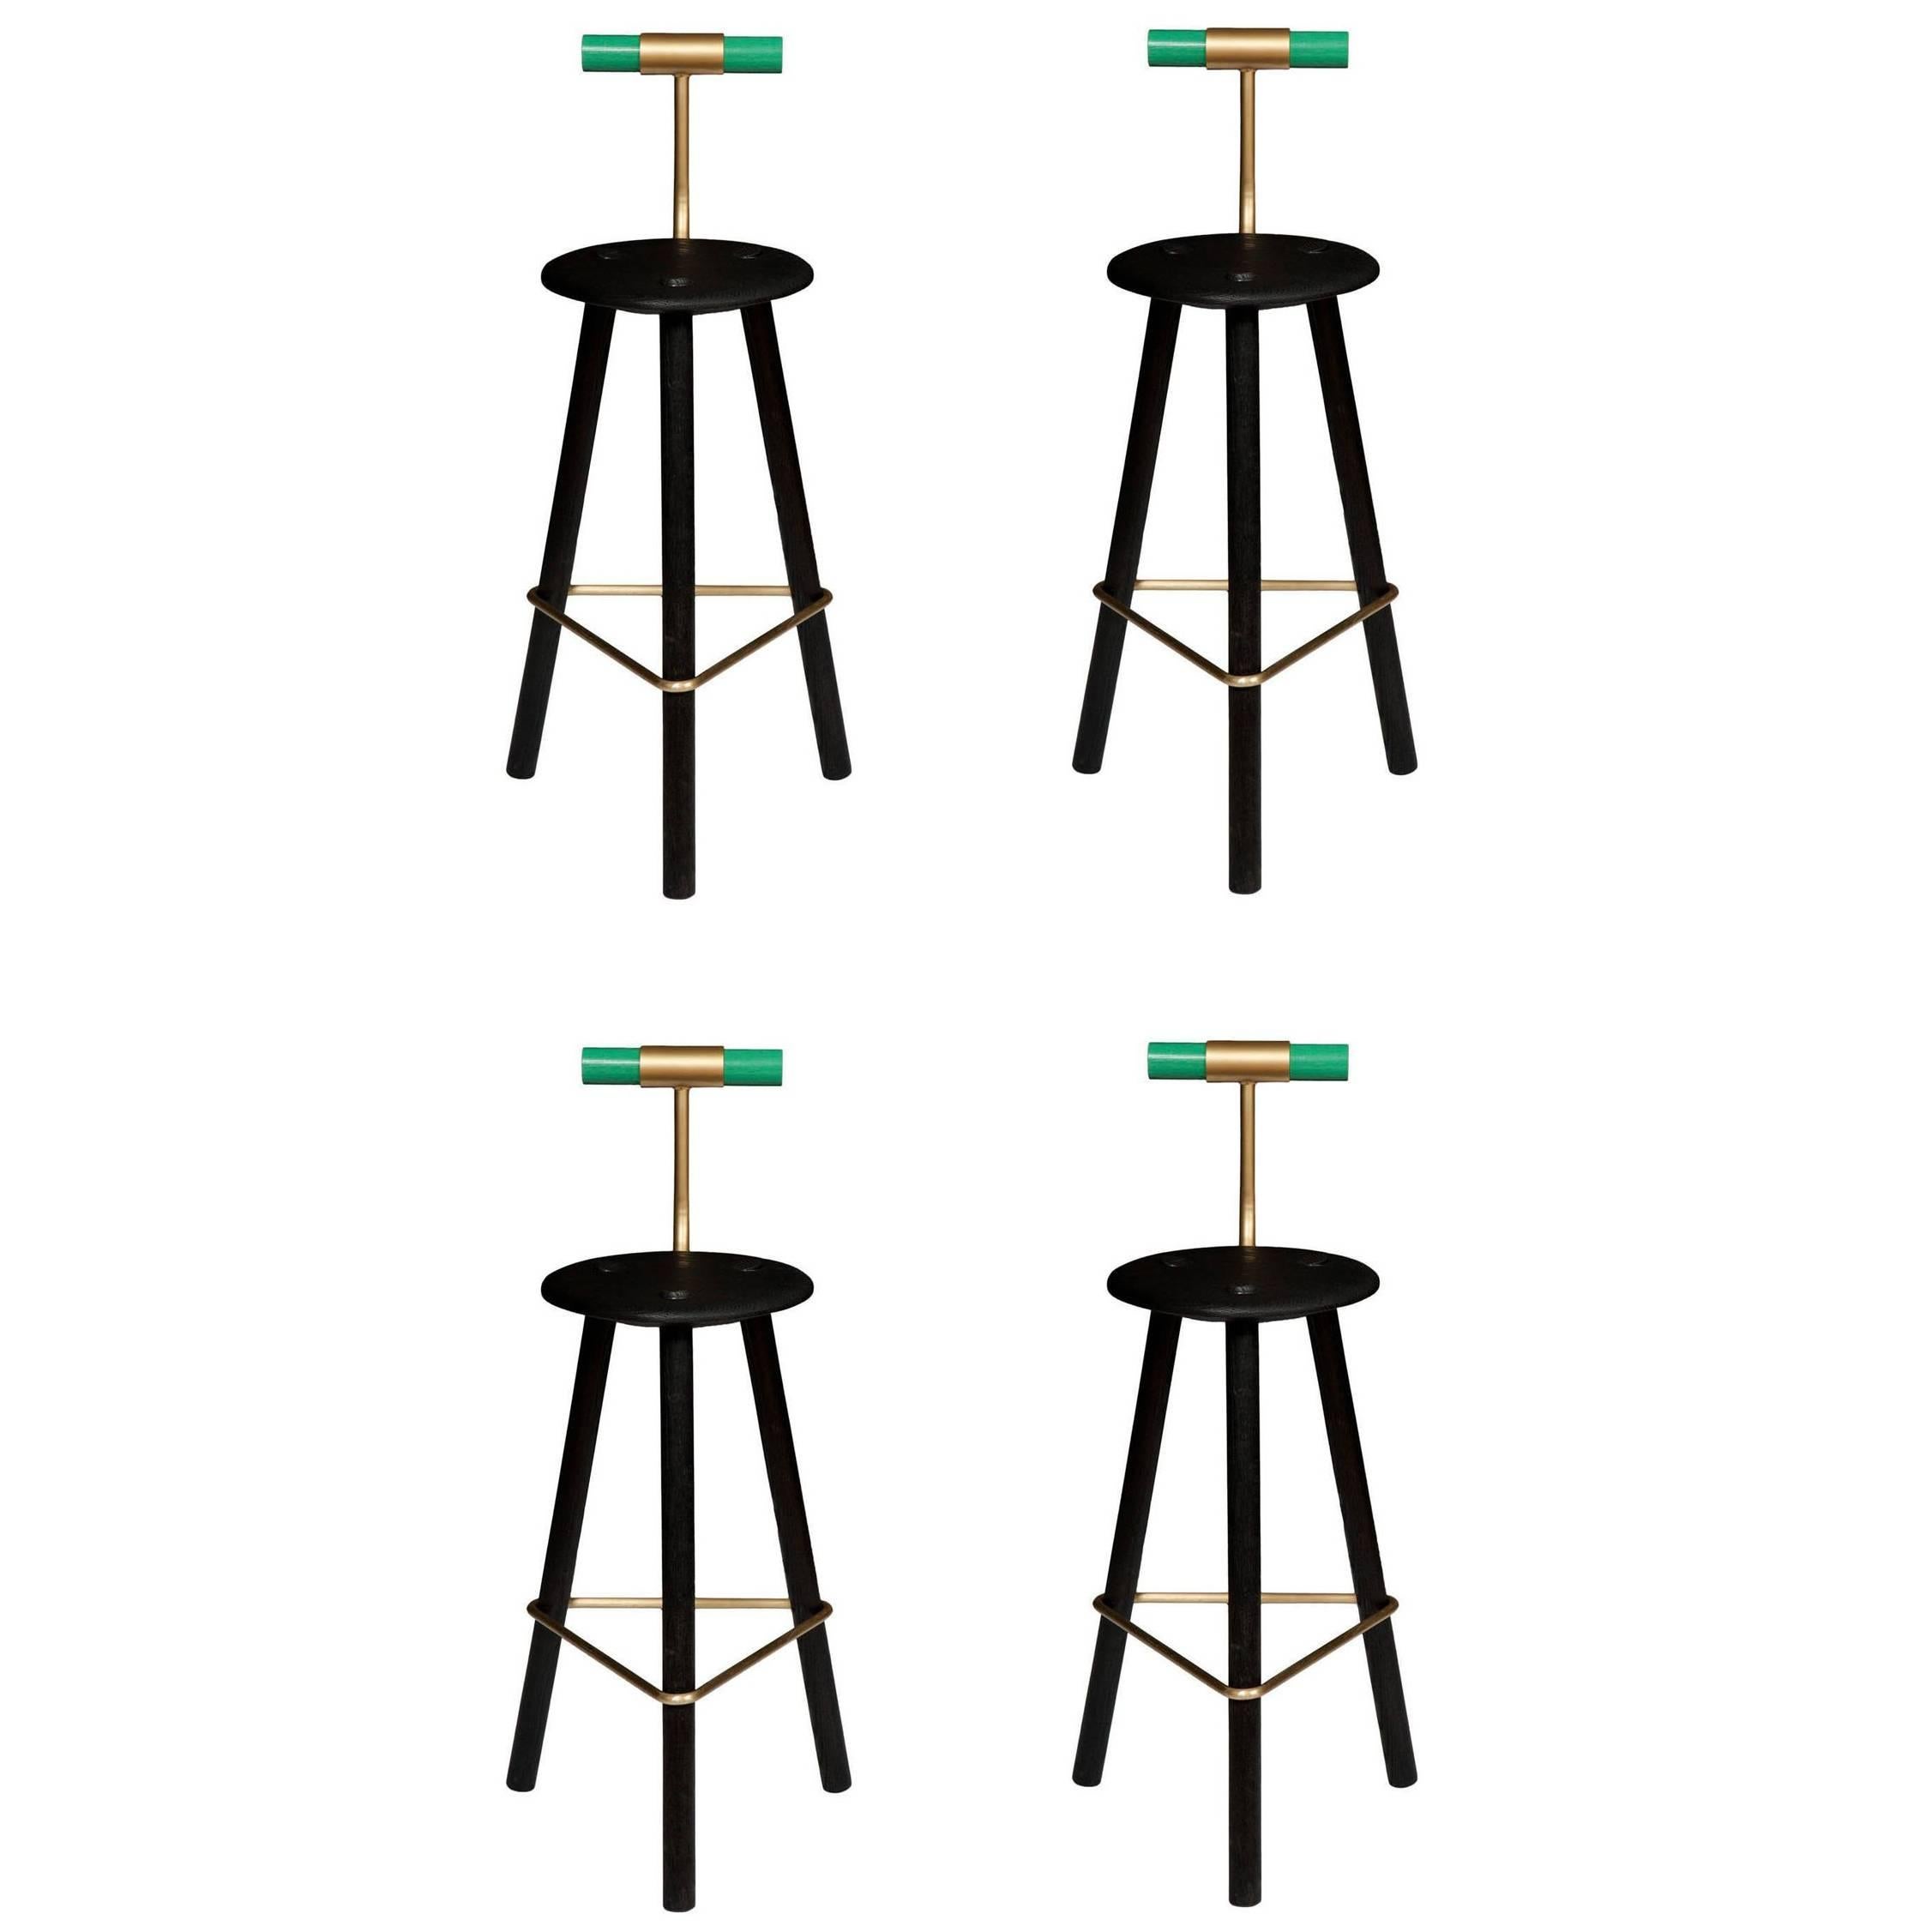 Set of Four Erickson Aesthetics Charred Ash Tripod Stools with Backrest For Sale